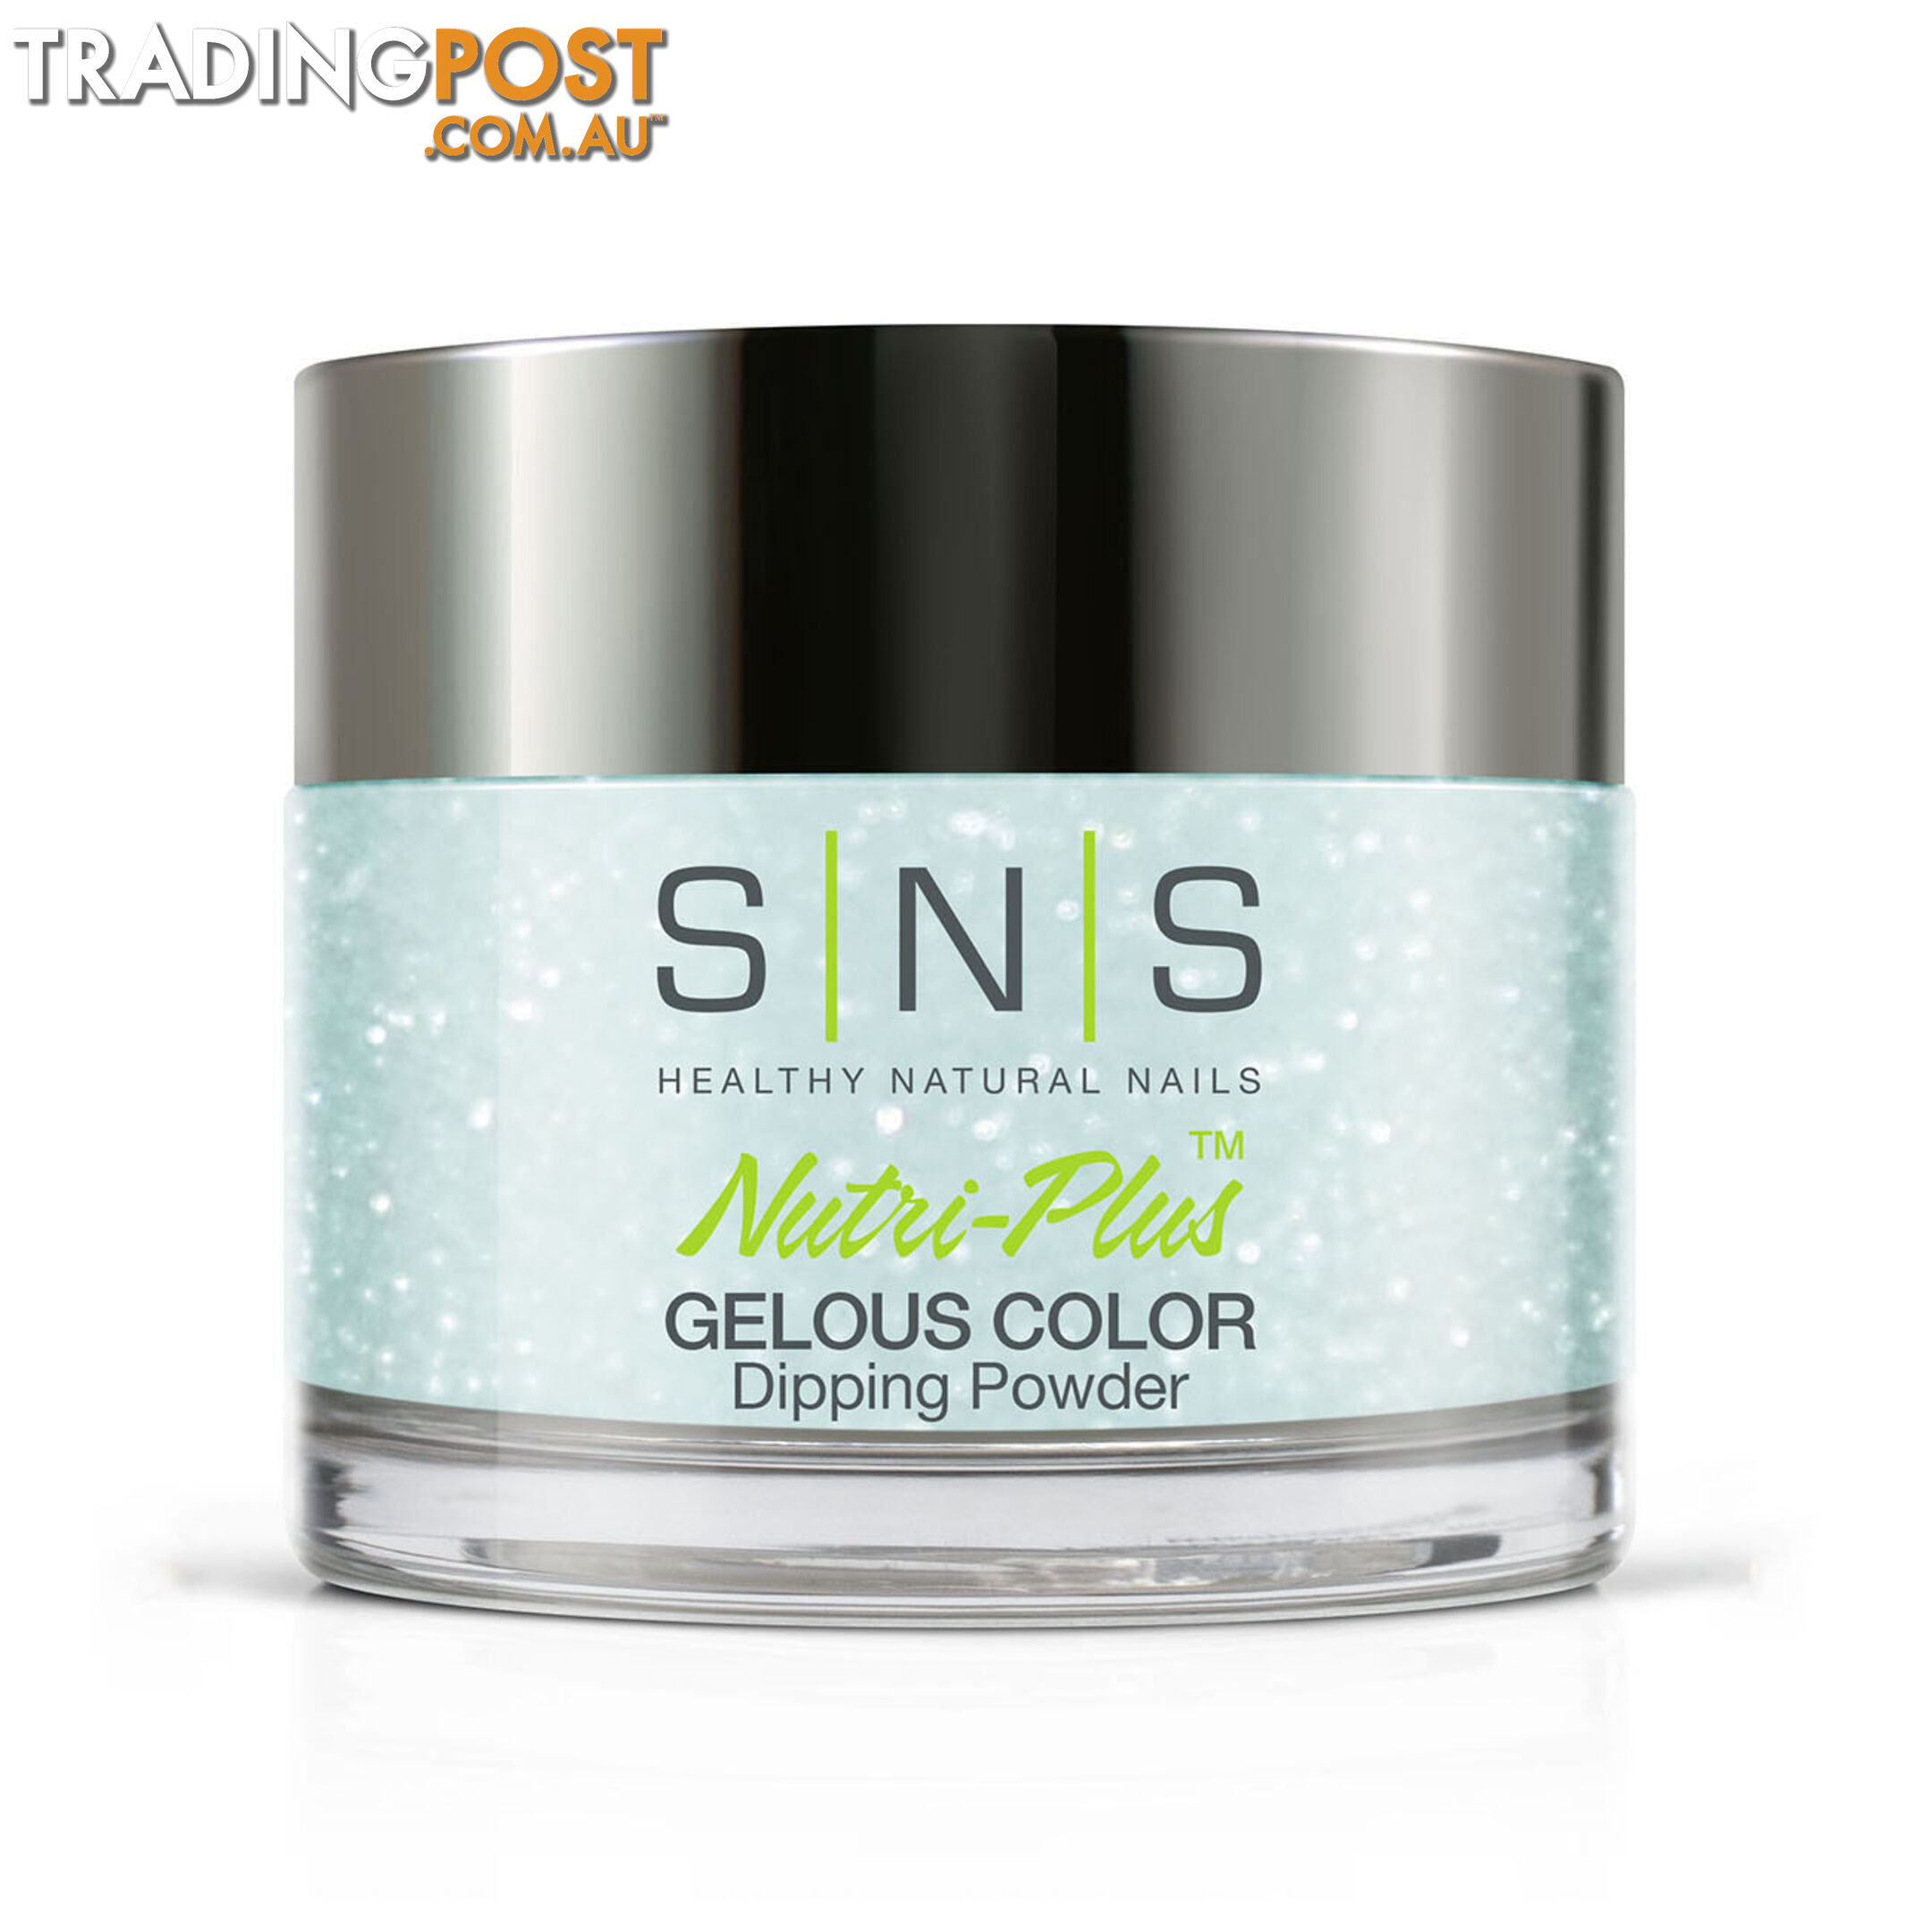 SNS SP08 Gelous Dipping Powder 28g (1oz) Head Out Like a Baby - 635635734732